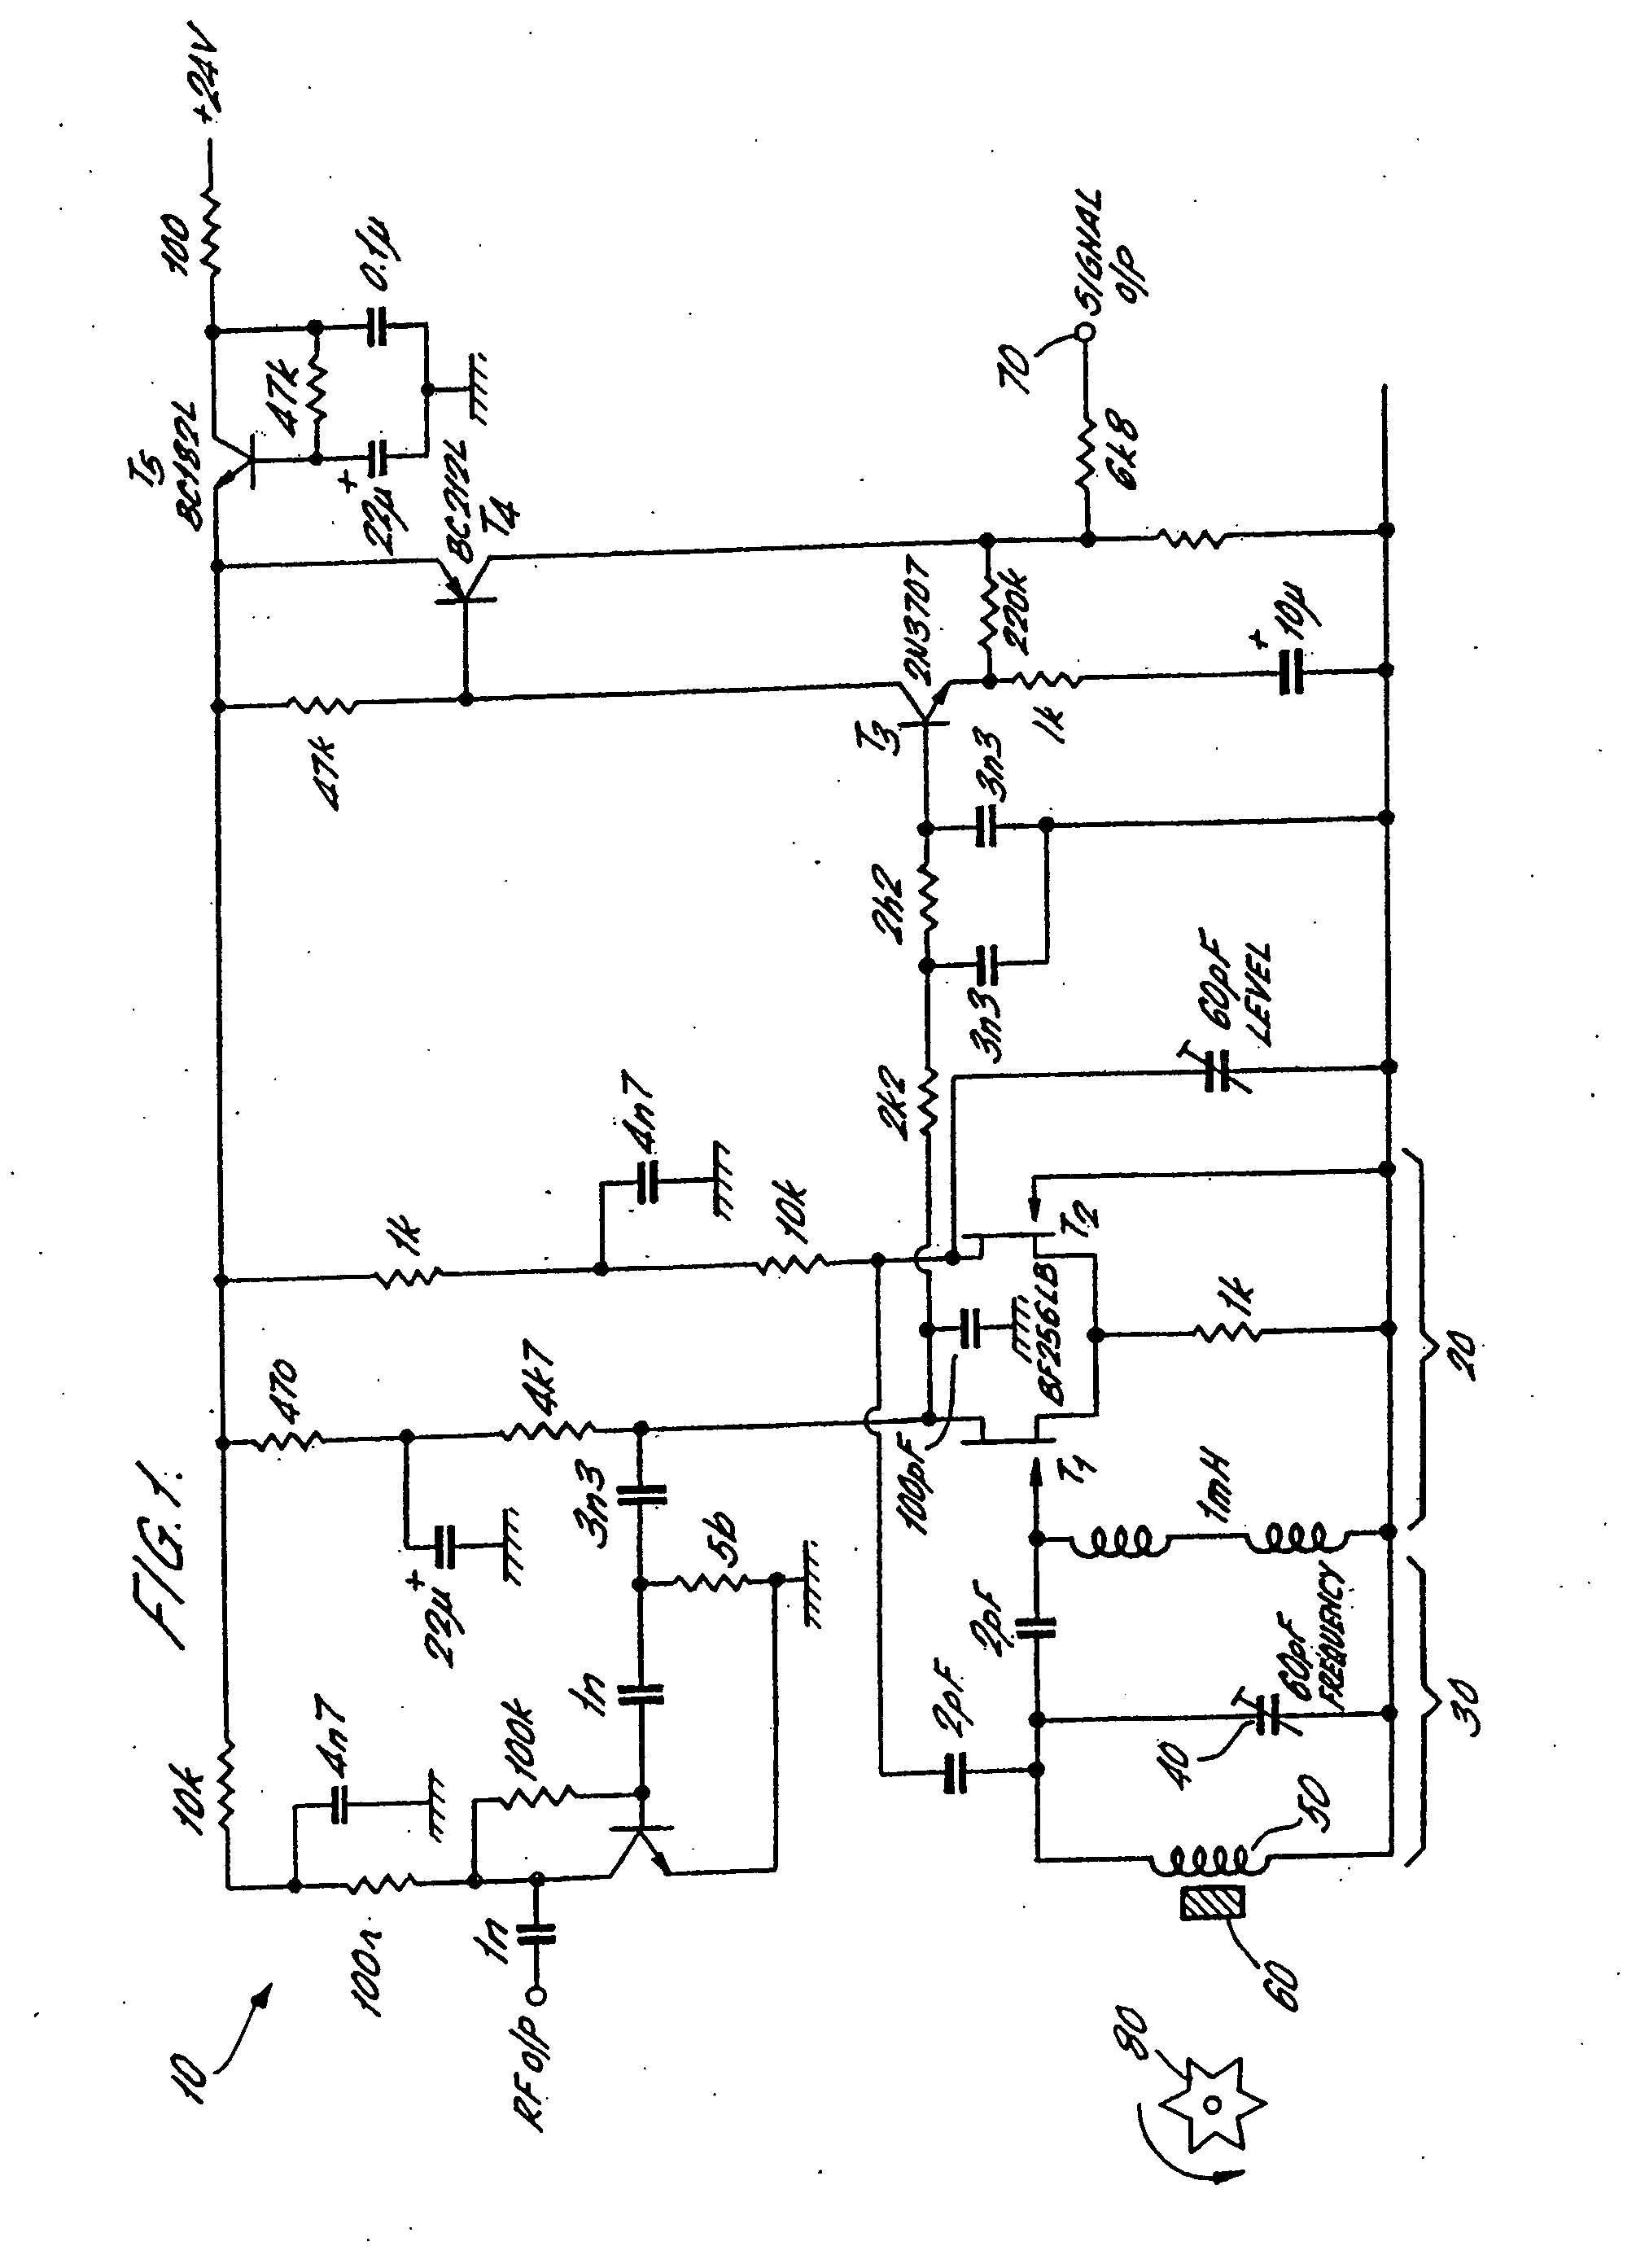 Position and electromagnetic field sensor